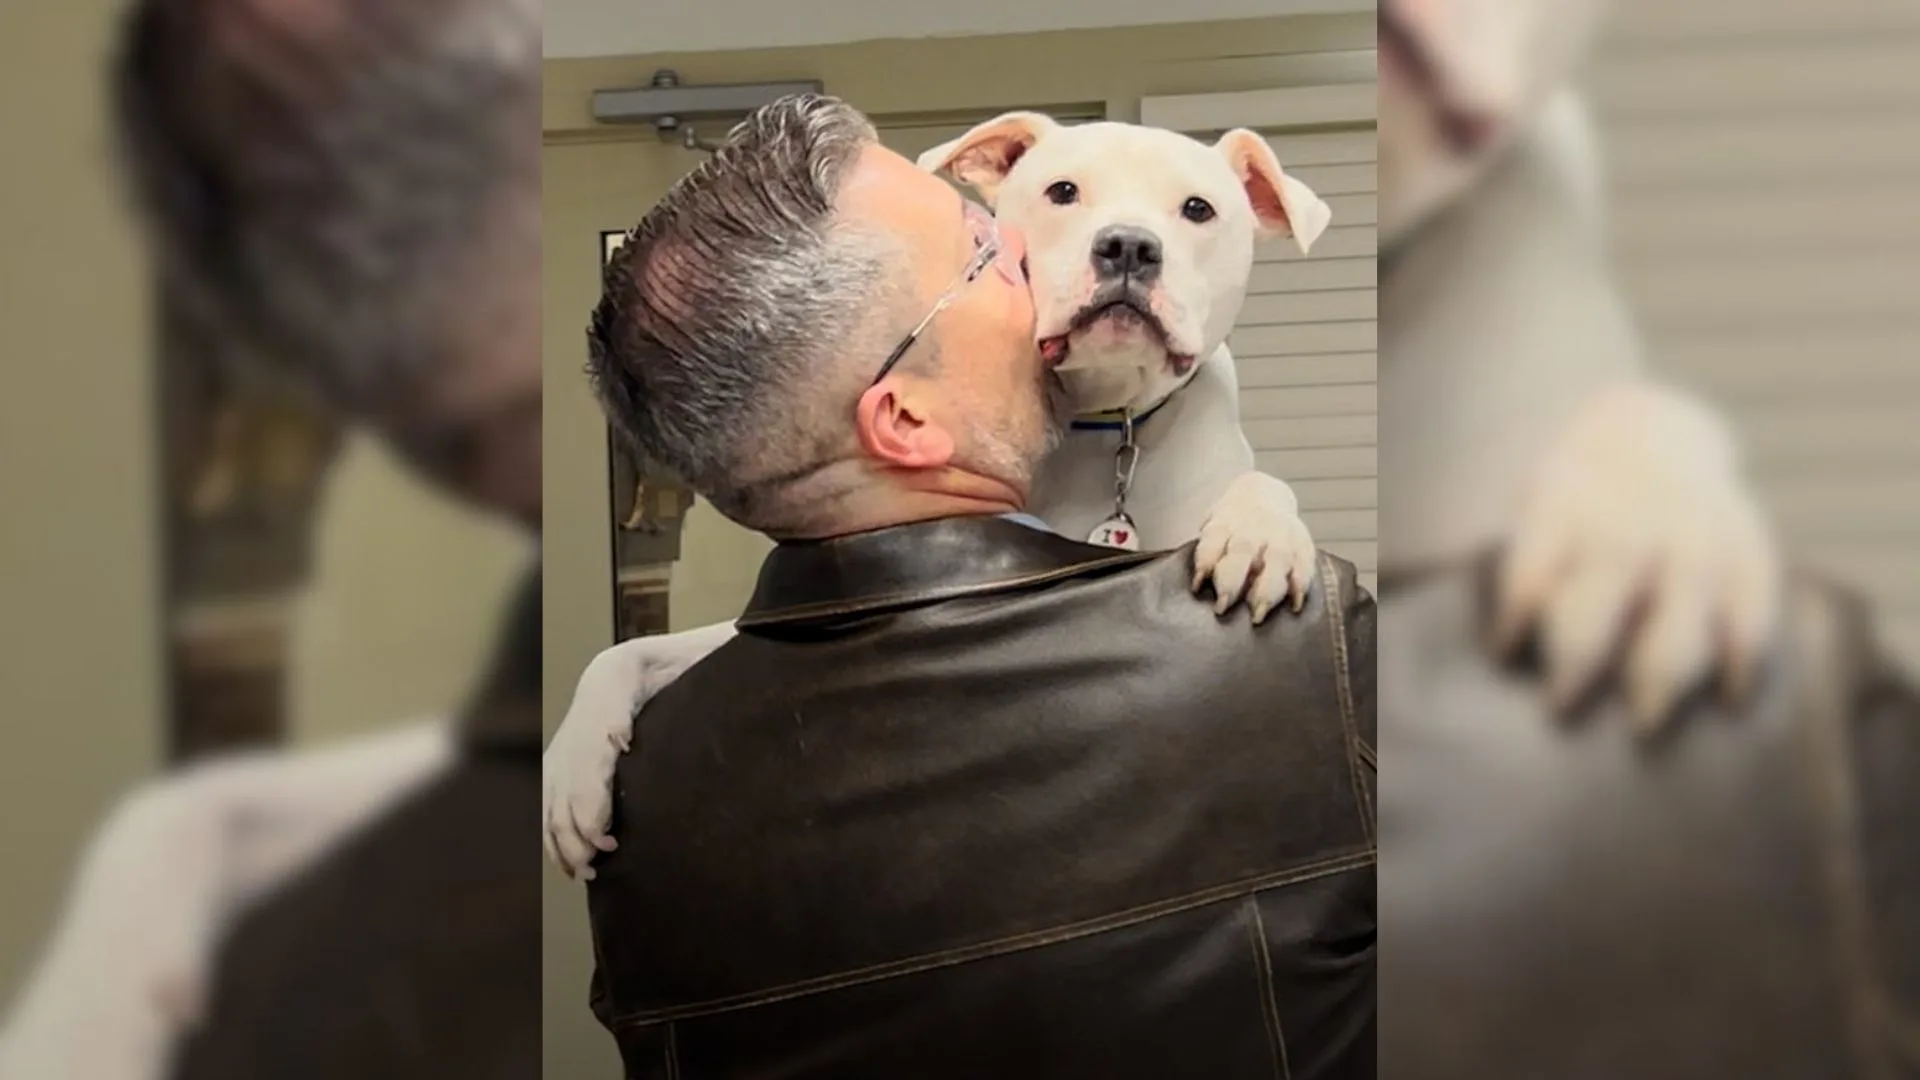 They Called Him ‘Broken Dog’, Then He Blossoms Into The Greatest Therapist Ever